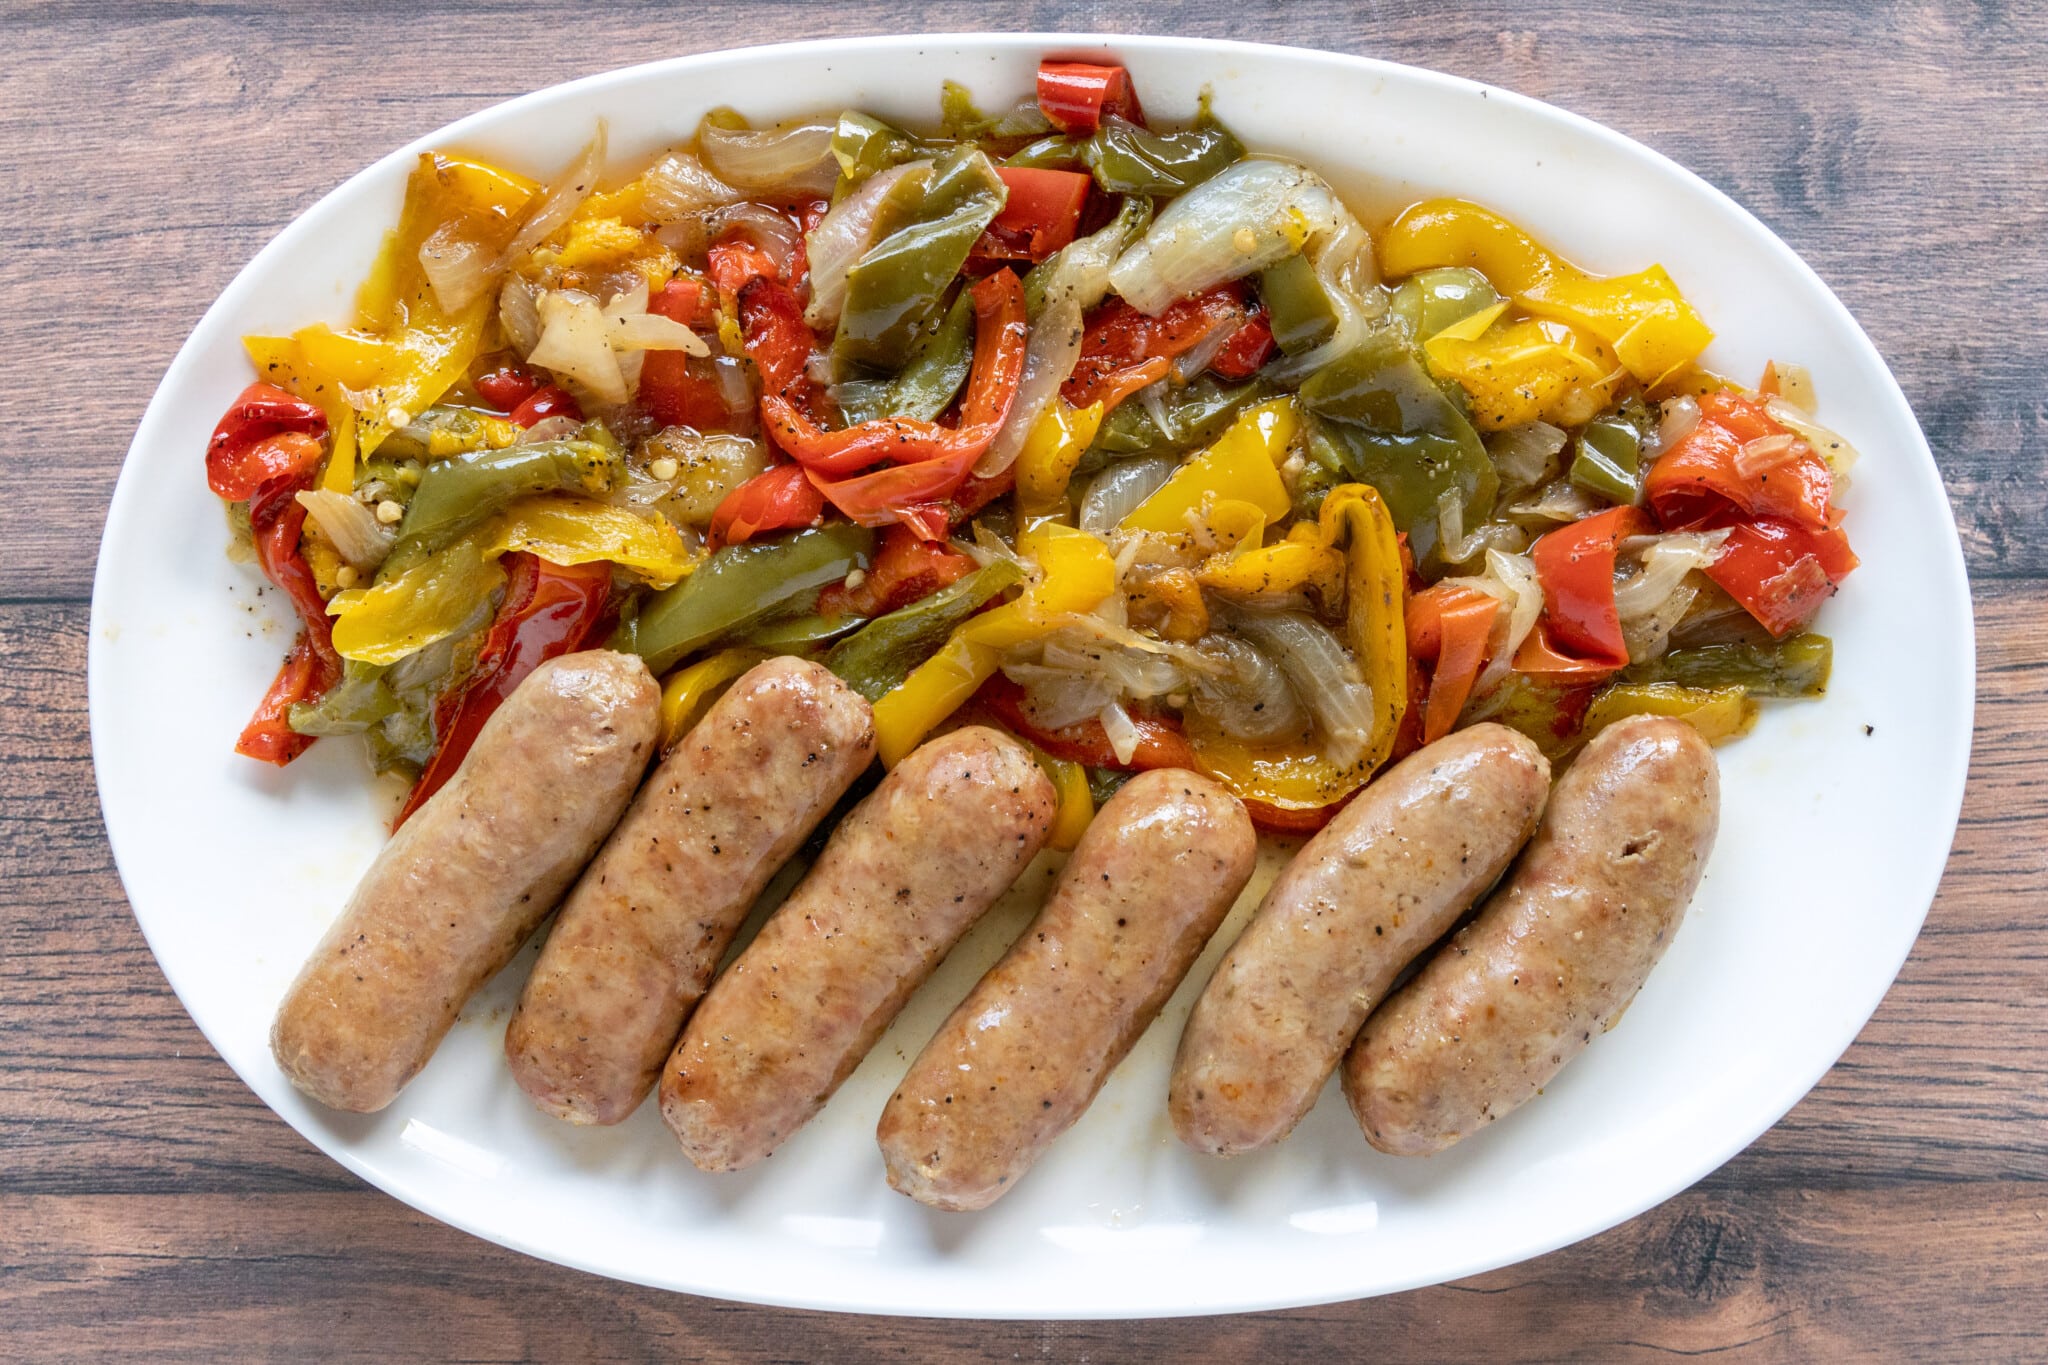 Italian sausage, peppers, and onions on a white platter.